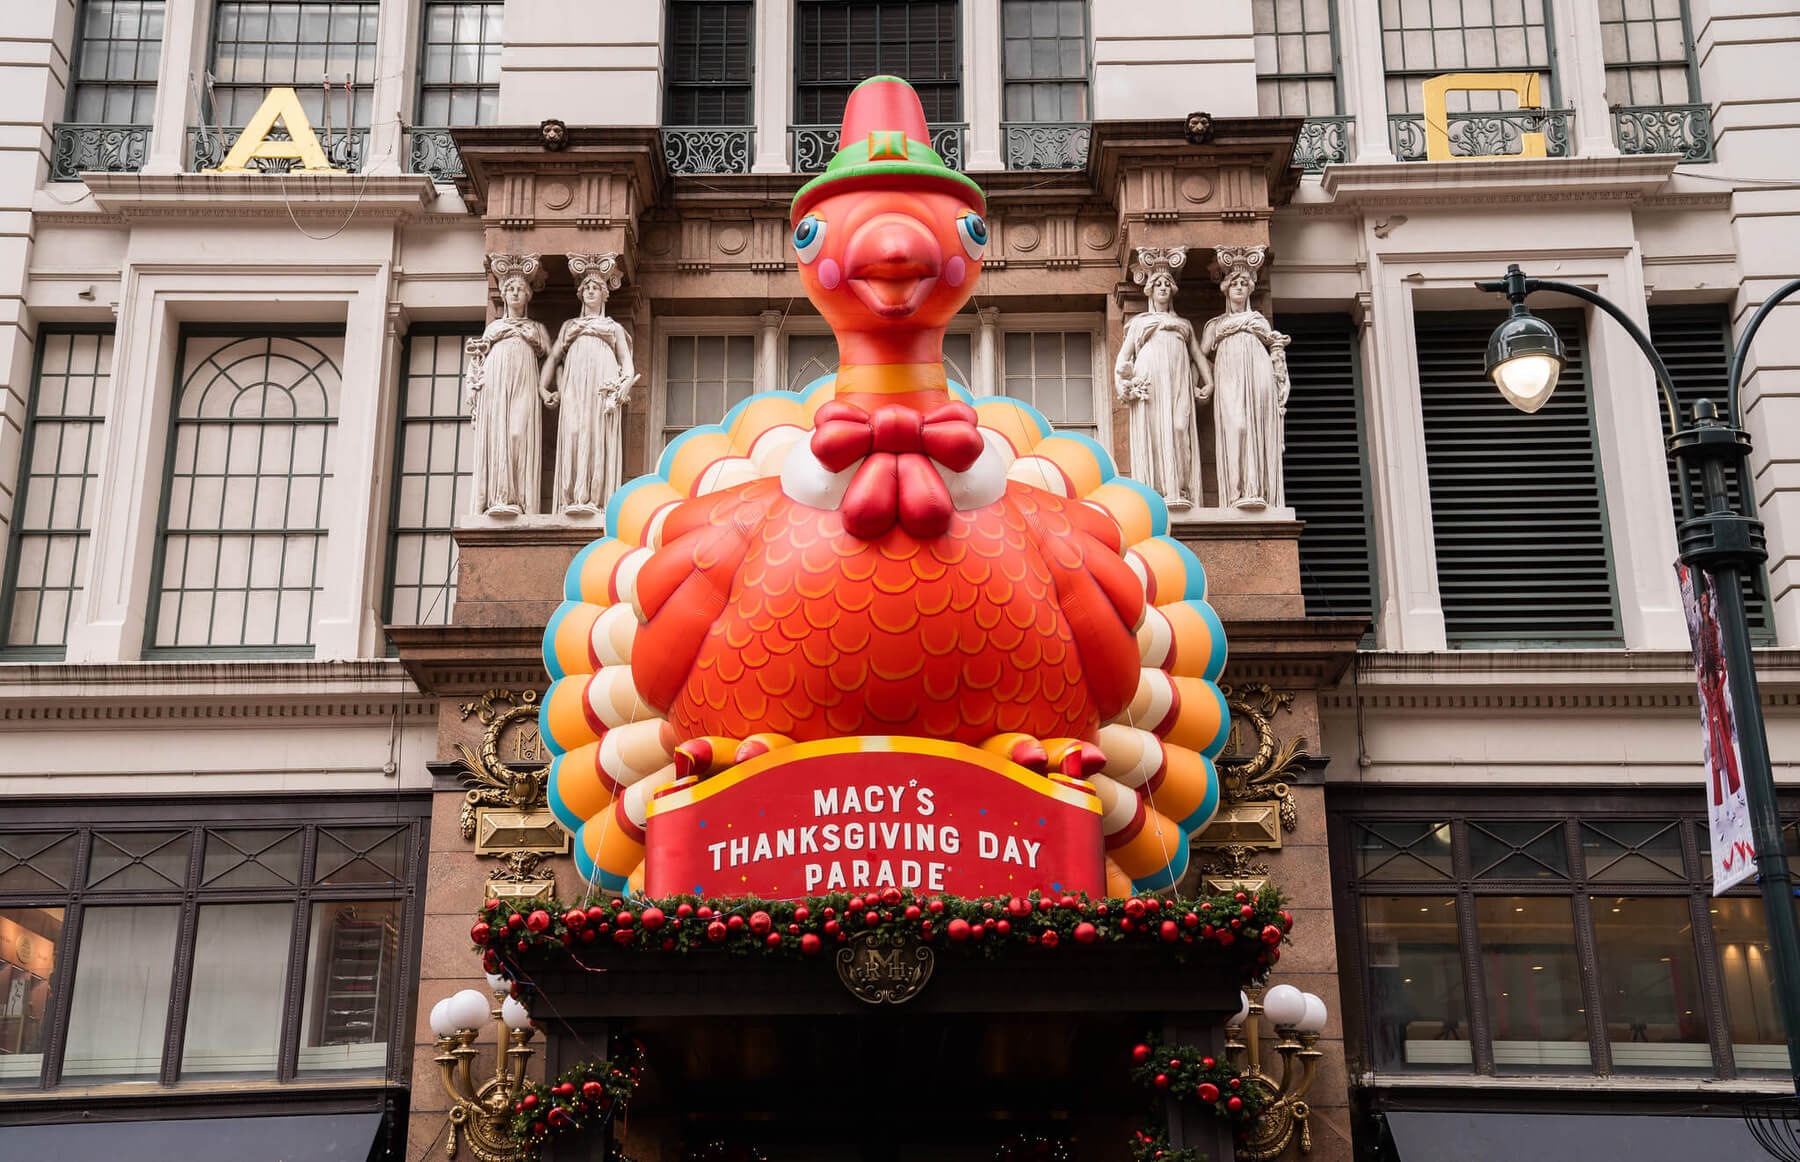 Macy's Thanksgiving Day Parade: A Crowd Control Case Study